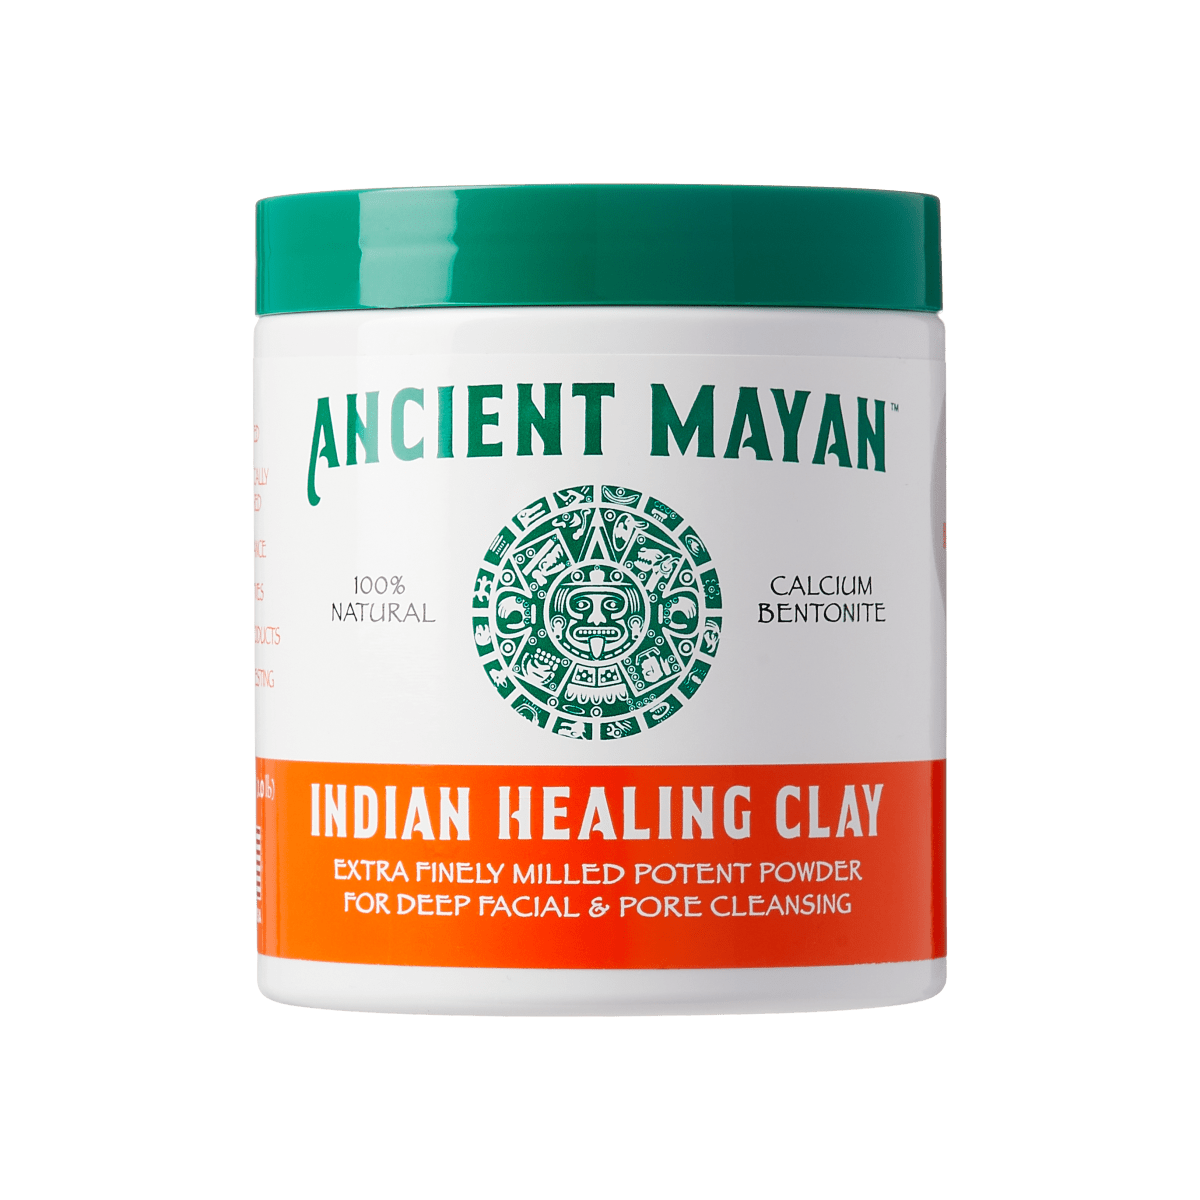 Ancient Mayan Indian Healing Clay powder. Used for deep conditioning hair, detoxifies skin and cleanses pores.